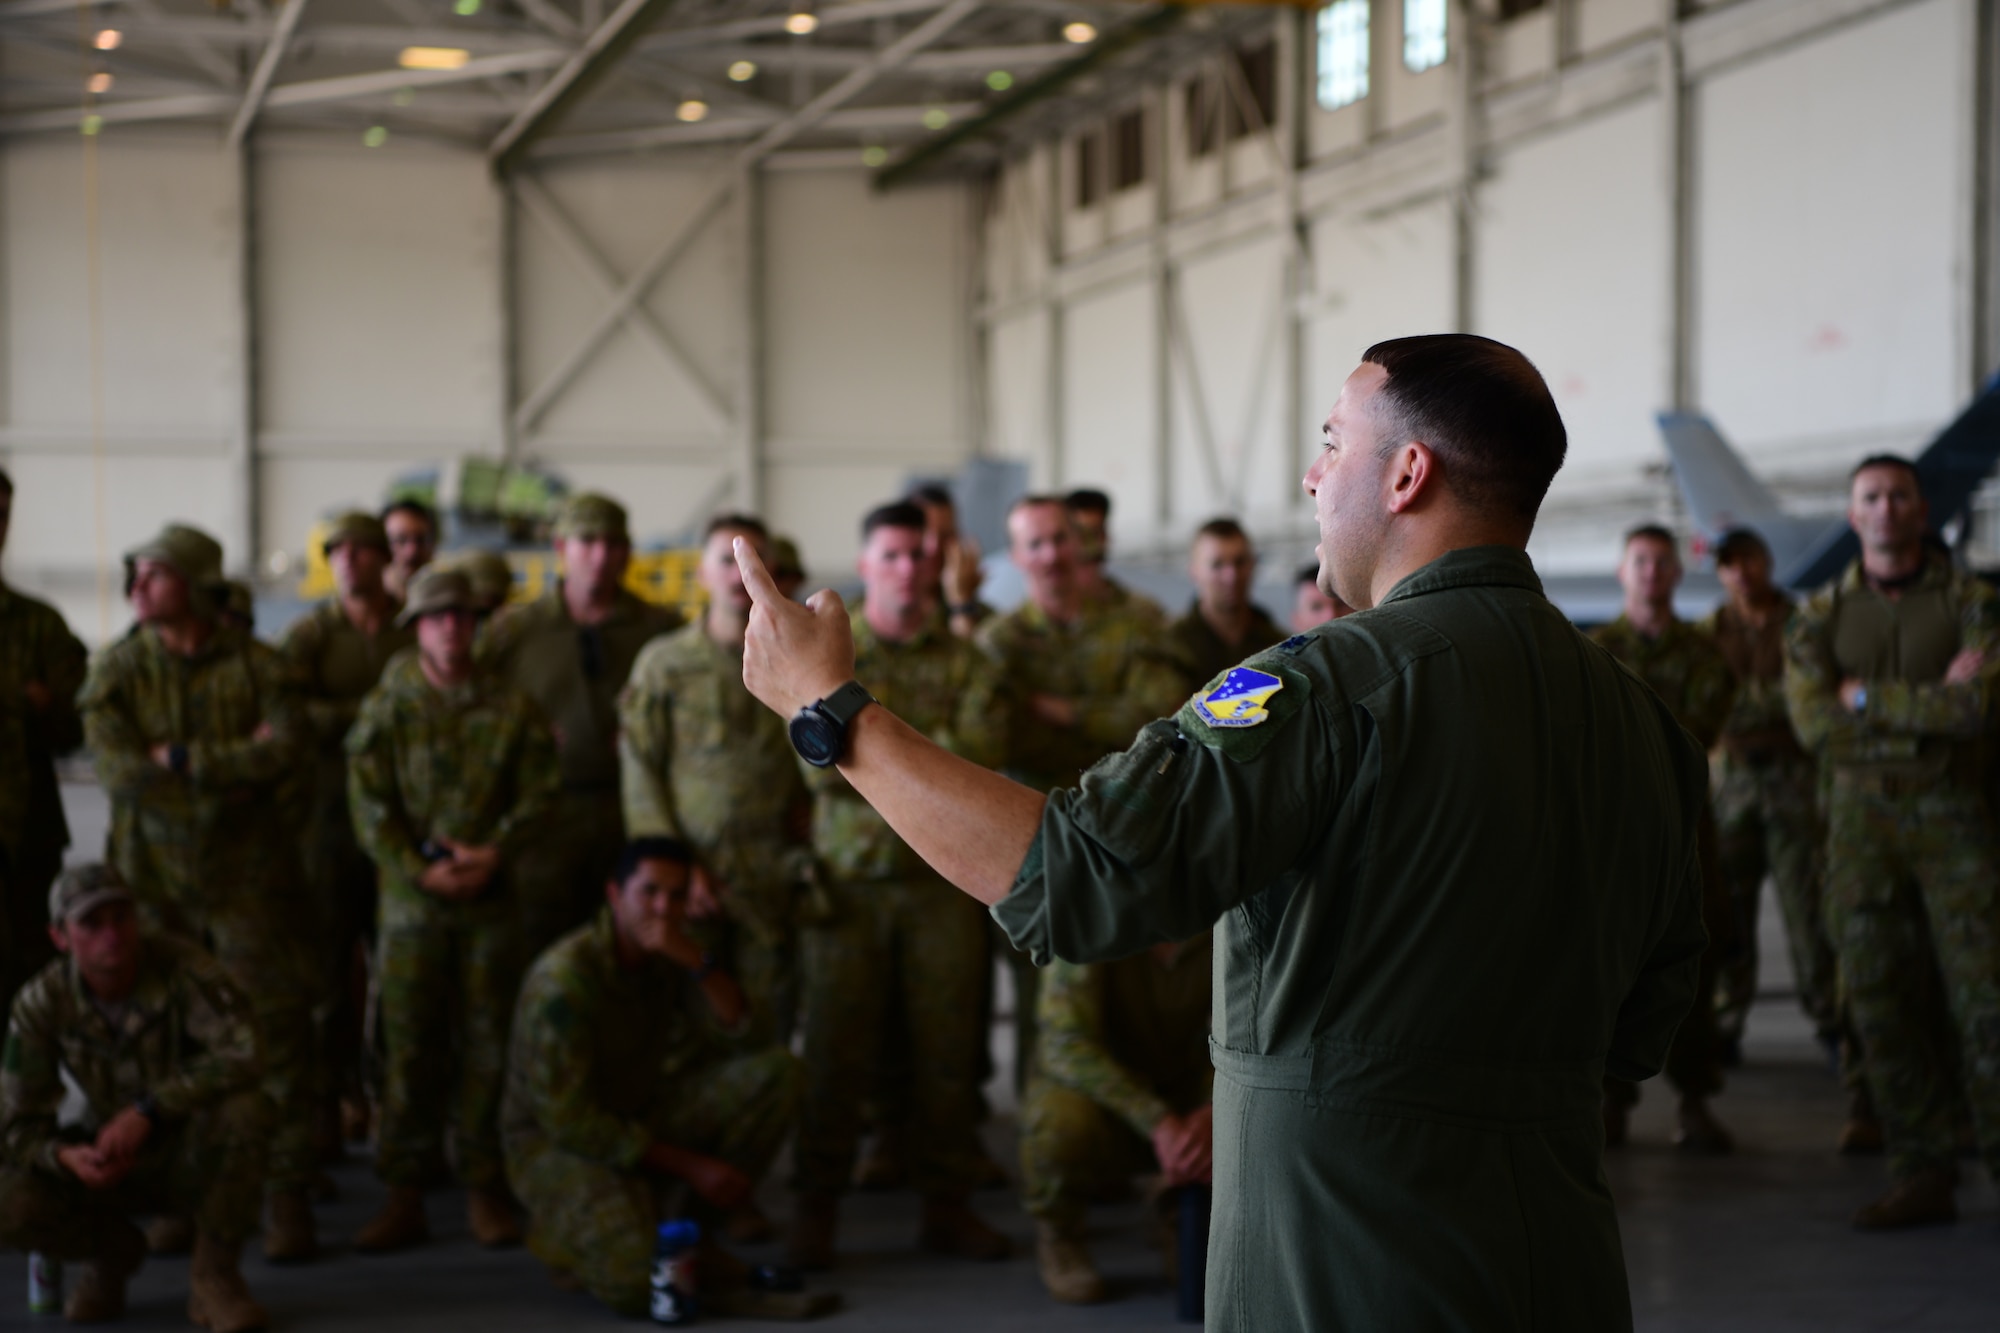 MARINE CORPS AIR STATION KANEOHE BAY, Hawaii (July 28, 2022) U.S. Air Force Lt. Col. Justin Muller, Rim of the Pacific (RIMPAC) 2022 MQ-9 Reaper detachment lead, explains MQ-9 operations and specifications to members of the Royal Australian Army and the New Zealand Army during Rim of the Pacific (RIMPAC) 2022, July 28, at Marine Corps Air Station Kaneohe Bay, Hawaii.